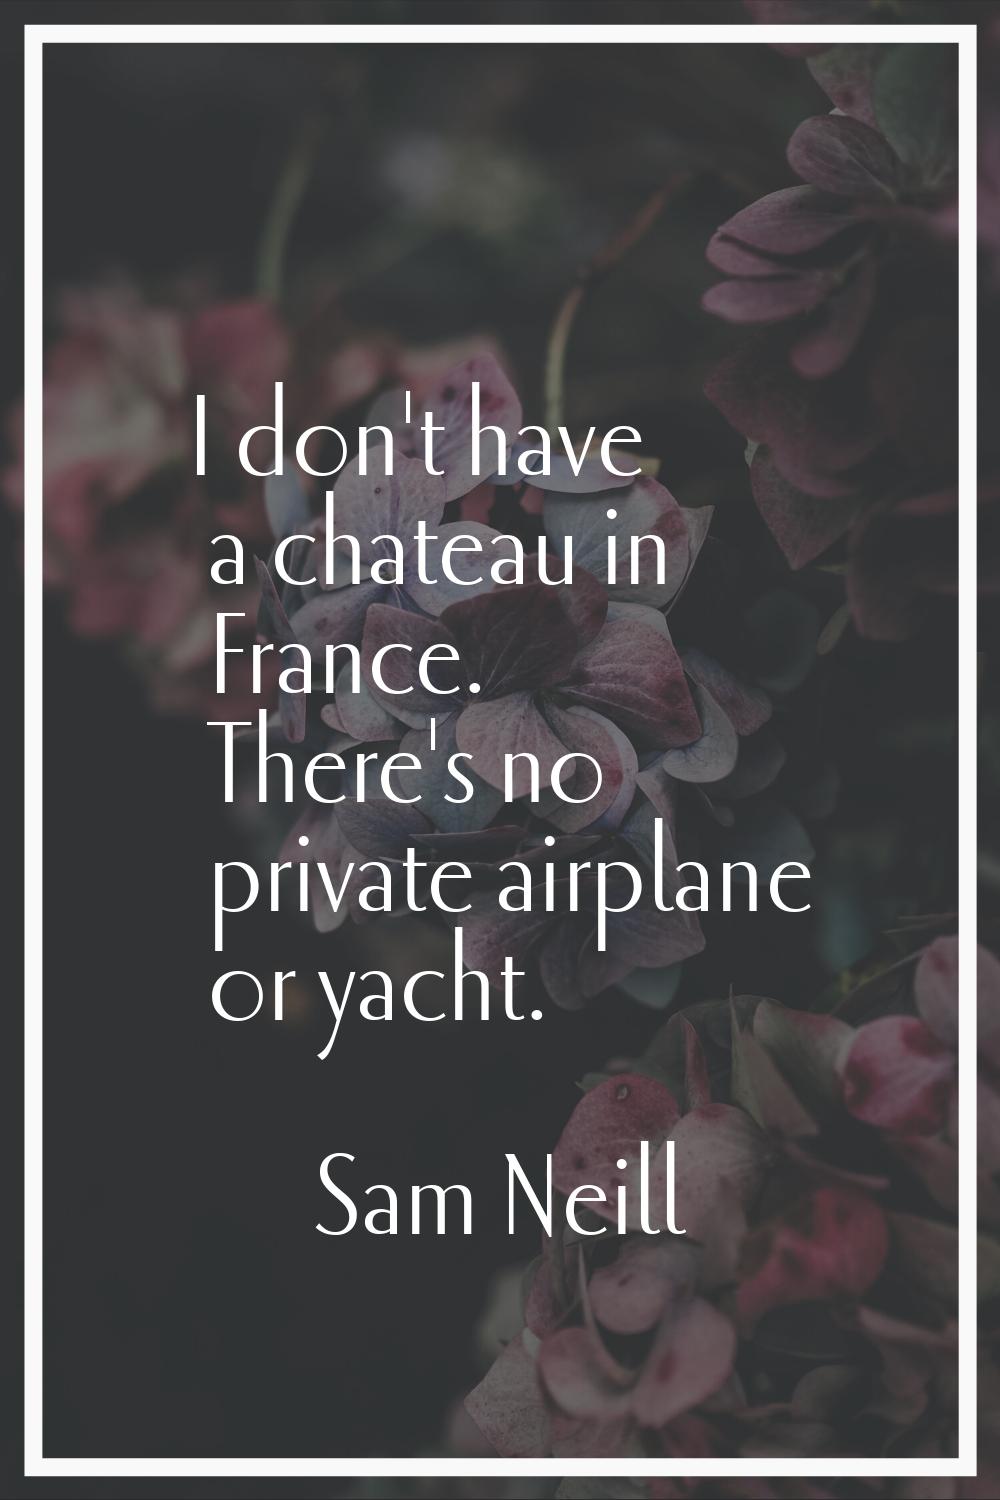 I don't have a chateau in France. There's no private airplane or yacht.